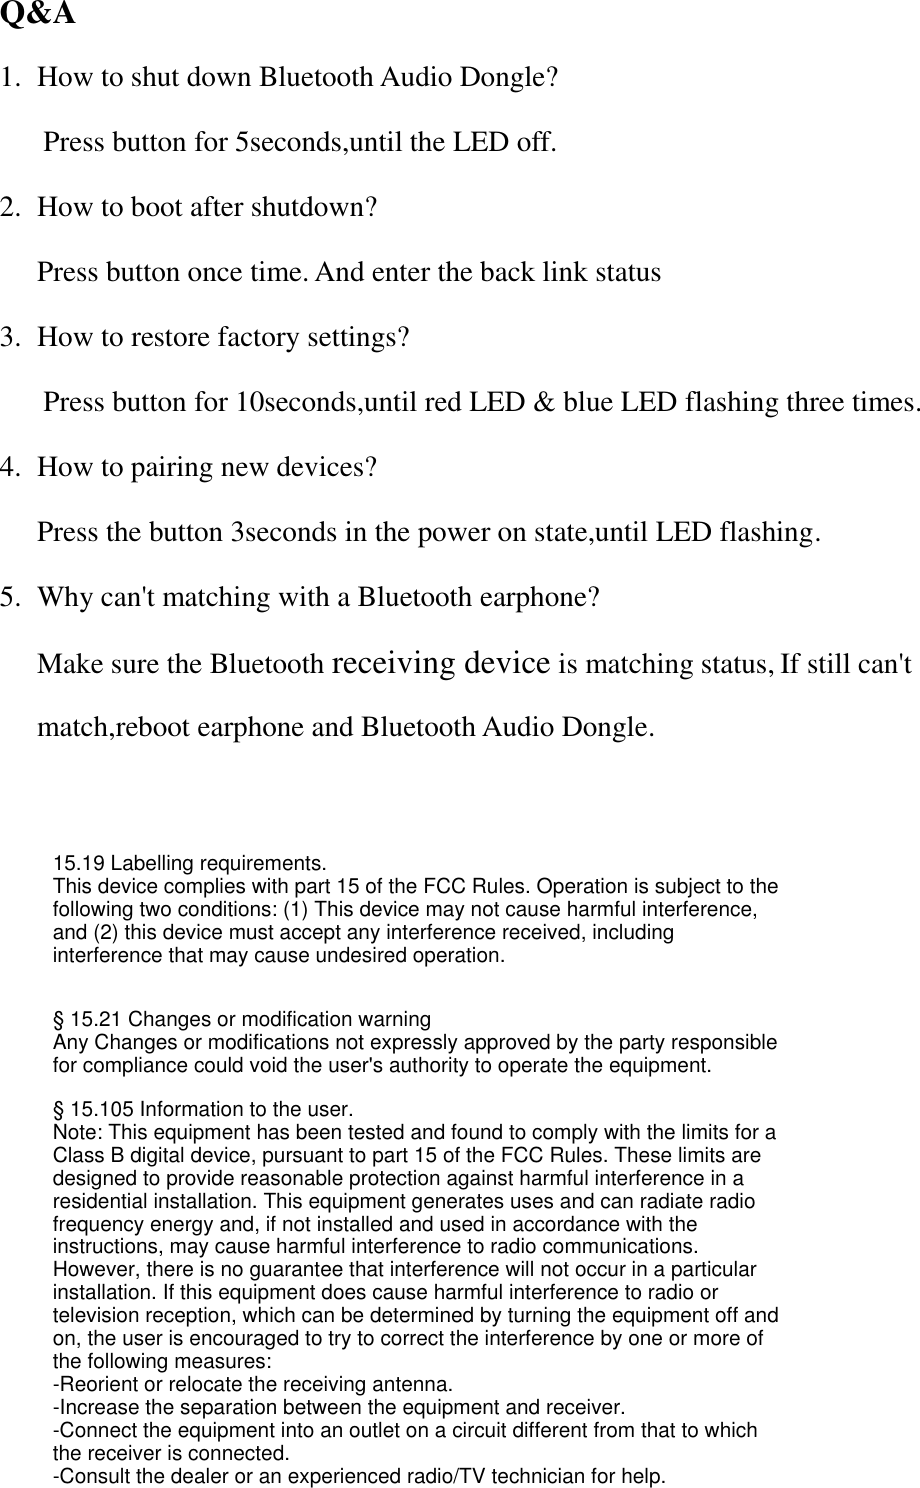 Q&amp;A 1. How to shut down Bluetooth Audio Dongle?   Press button for 5seconds,until the LED off. 2. How to boot after shutdown? Press button once time. And enter the back link status 3. How to restore factory settings?  Press button for 10seconds,until red LED &amp; blue LED flashing three times. 4. How to pairing new devices? Press the button 3seconds in the power on state,until LED flashing. 5. Why can&apos;t matching with a Bluetooth earphone? Make sure the Bluetooth receiving device is matching status, If still can&apos;t match,reboot earphone and Bluetooth Audio Dongle.  15.19 Labelling requirements.This device complies with part 15 of the FCC Rules. Operation is subject to the following two conditions: (1) This device may not cause harmful interference, and (2) this device must accept any interference received, including interference that may cause undesired operation.§ 15.21 Changes or modification warningAny Changes or modifications not expressly approved by the party responsible for compliance could void the user&apos;s authority to operate the equipment.§ 15.105 Information to the user.Note: This equipment has been tested and found to comply with the limits for a Class B digital device, pursuant to part 15 of the FCC Rules. These limits are designed to provide reasonable protection against harmful interference in a residential installation. This equipment generates uses and can radiate radio frequency energy and, if not installed and used in accordance with the instructions, may cause harmful interference to radio communications. However, there is no guarantee that interference will not occur in a particular installation. If this equipment does cause harmful interference to radio or television reception, which can be determined by turning the equipment off and on, the user is encouraged to try to correct the interference by one or more of the following measures:-Reorient or relocate the receiving antenna.-Increase the separation between the equipment and receiver.-Connect the equipment into an outlet on a circuit different from that to which the receiver is connected.-Consult the dealer or an experienced radio/TV technician for help.